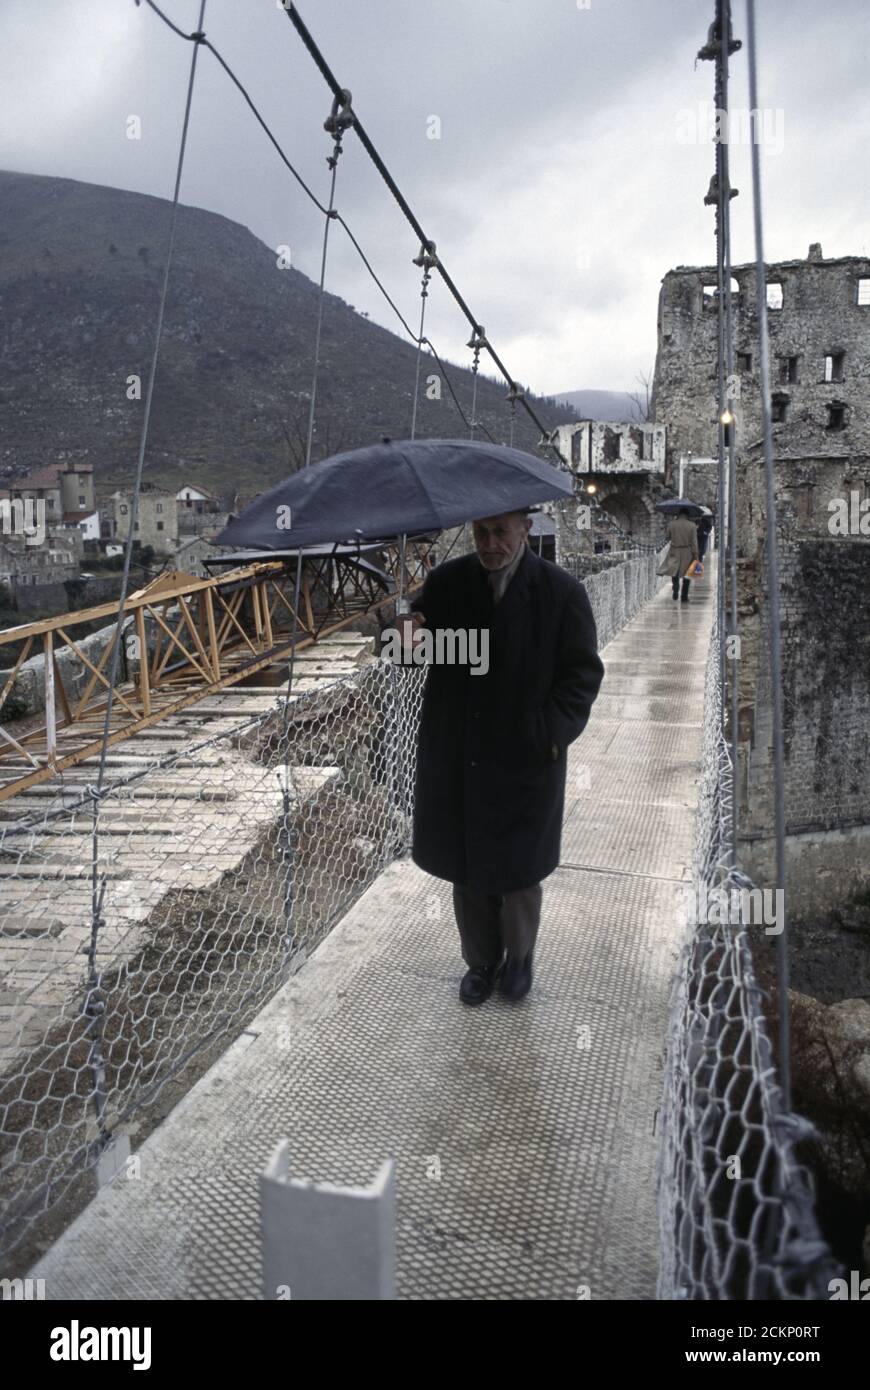 6th December 1995 During the war in Bosnia: people cross a cable footbridge that replaced the Stari Most (Old Bridge), over the Neretva River in Mostar. Stock Photo